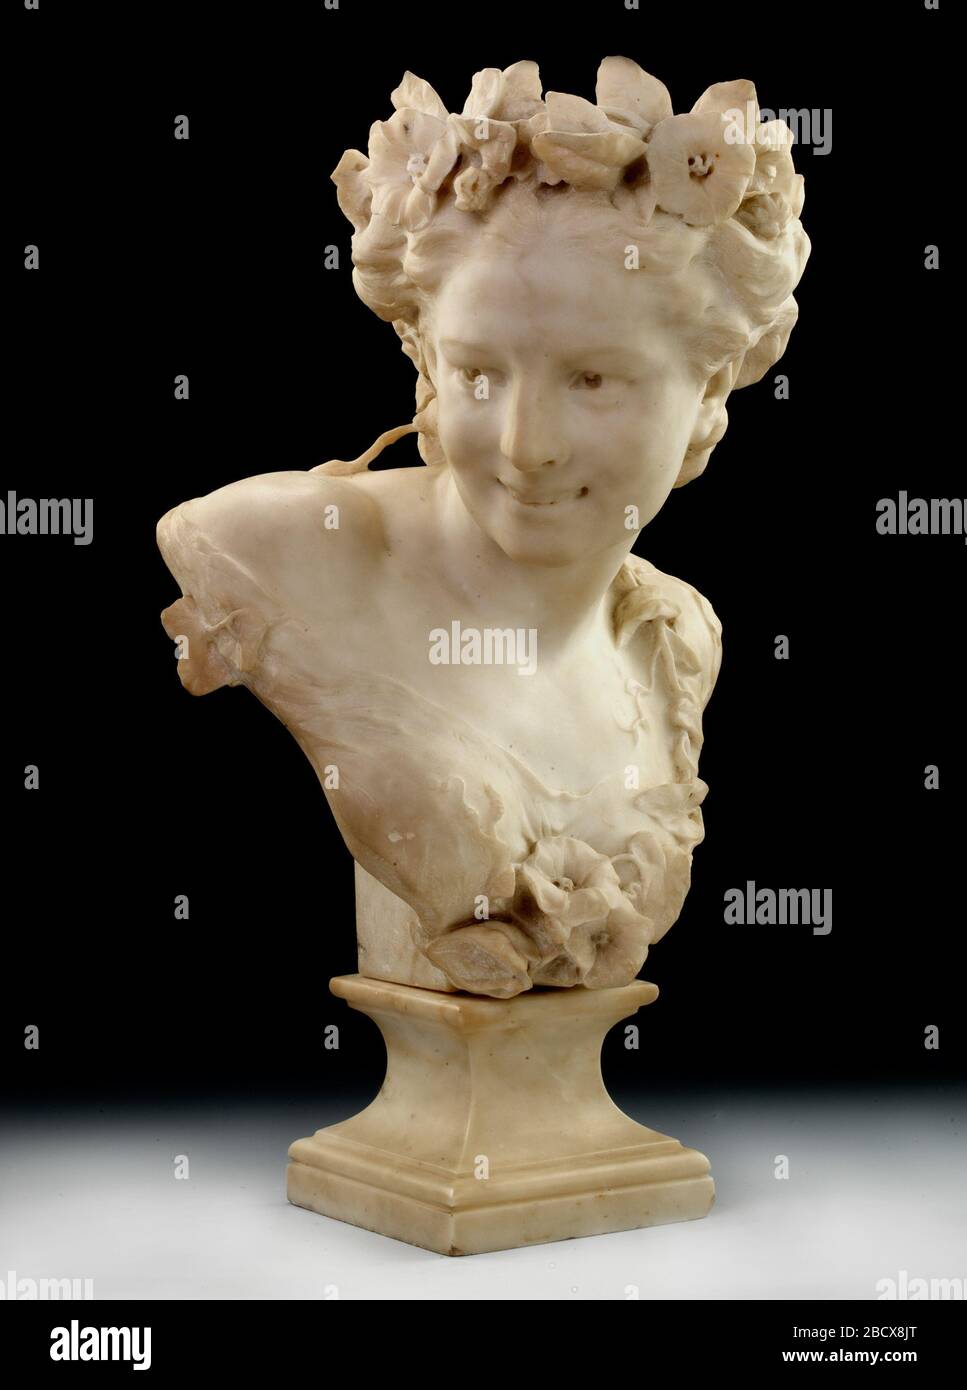 Springtime. Jean-Baptiste Carpeaux created this sculpture personifying the season of spring in 1871, when he was working on small editions and busts in order to make money during the Franco-Prussian War. Stock Photo